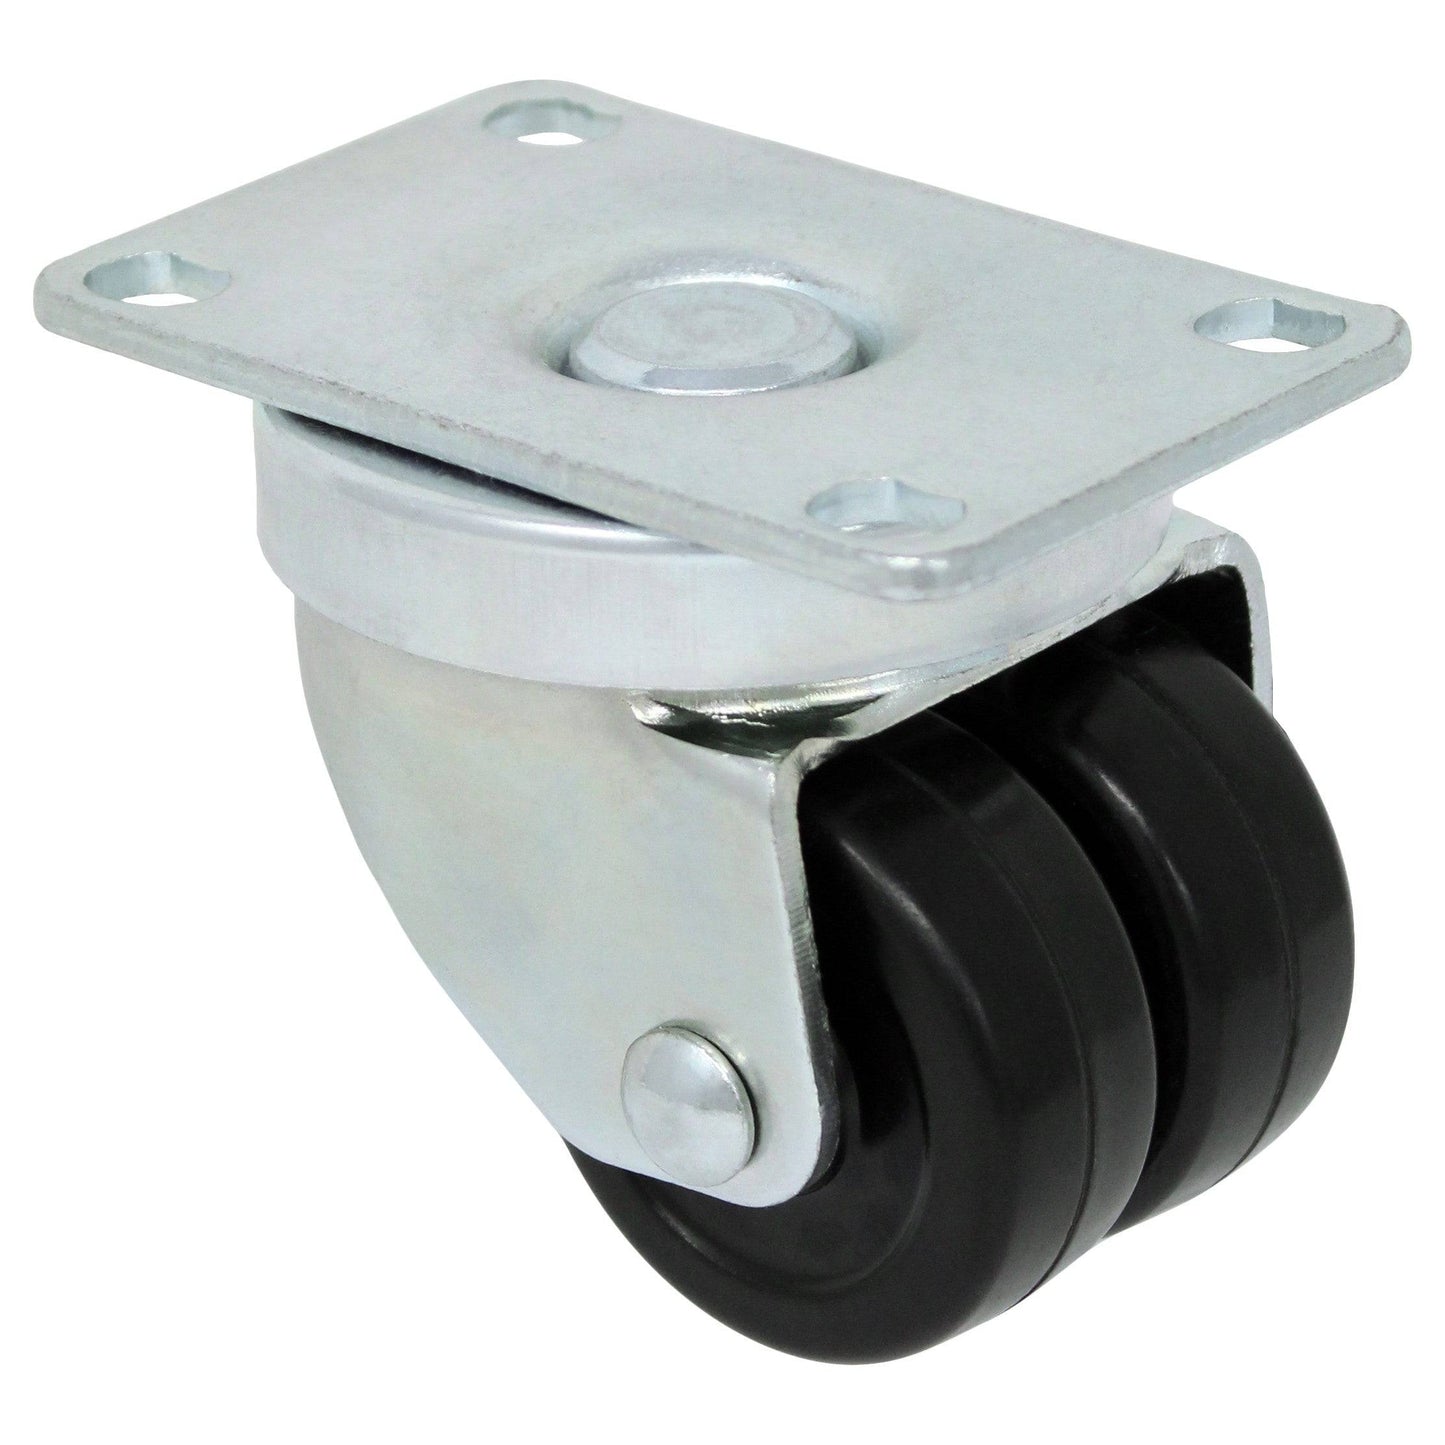 2" Double Wheel Hard Rubber Swivel Caster - 250 lbs. Capacity - Durable Superior Casters